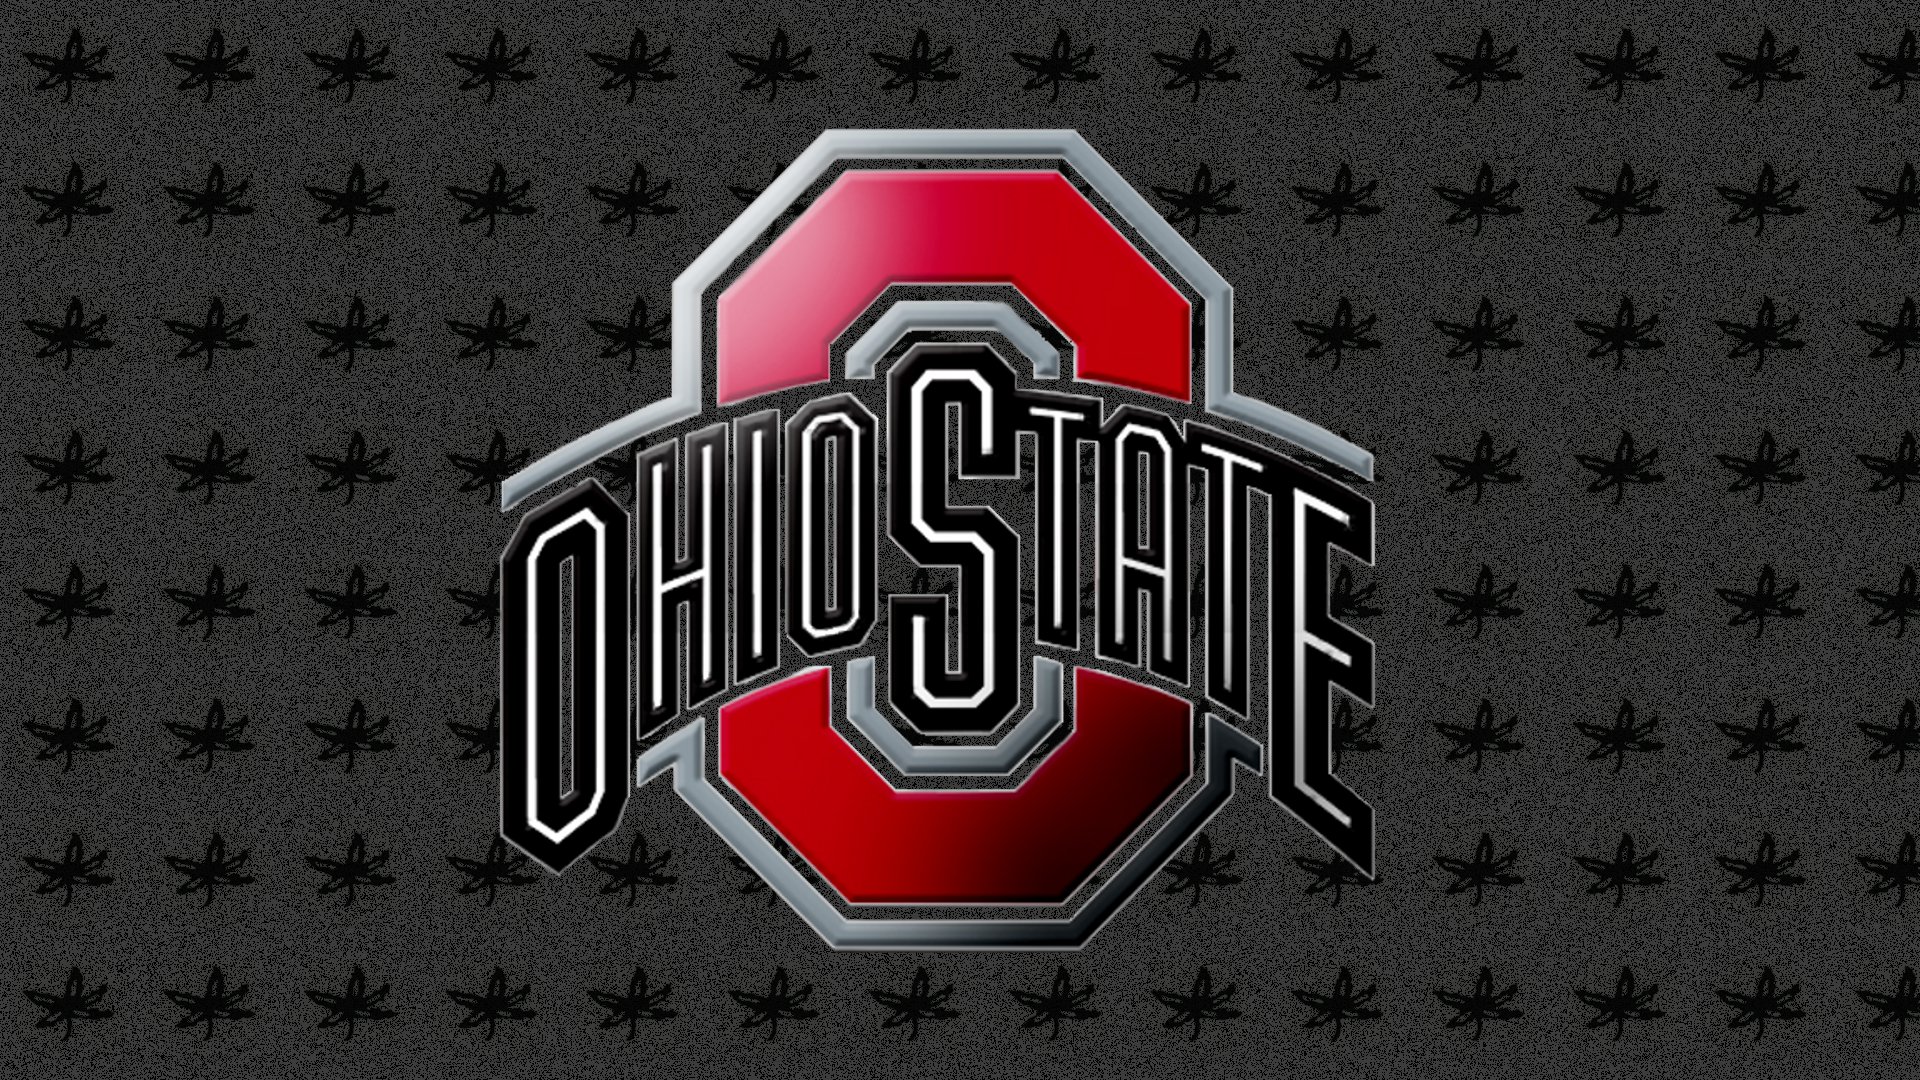 Swagg University Ohio State Image Pictures